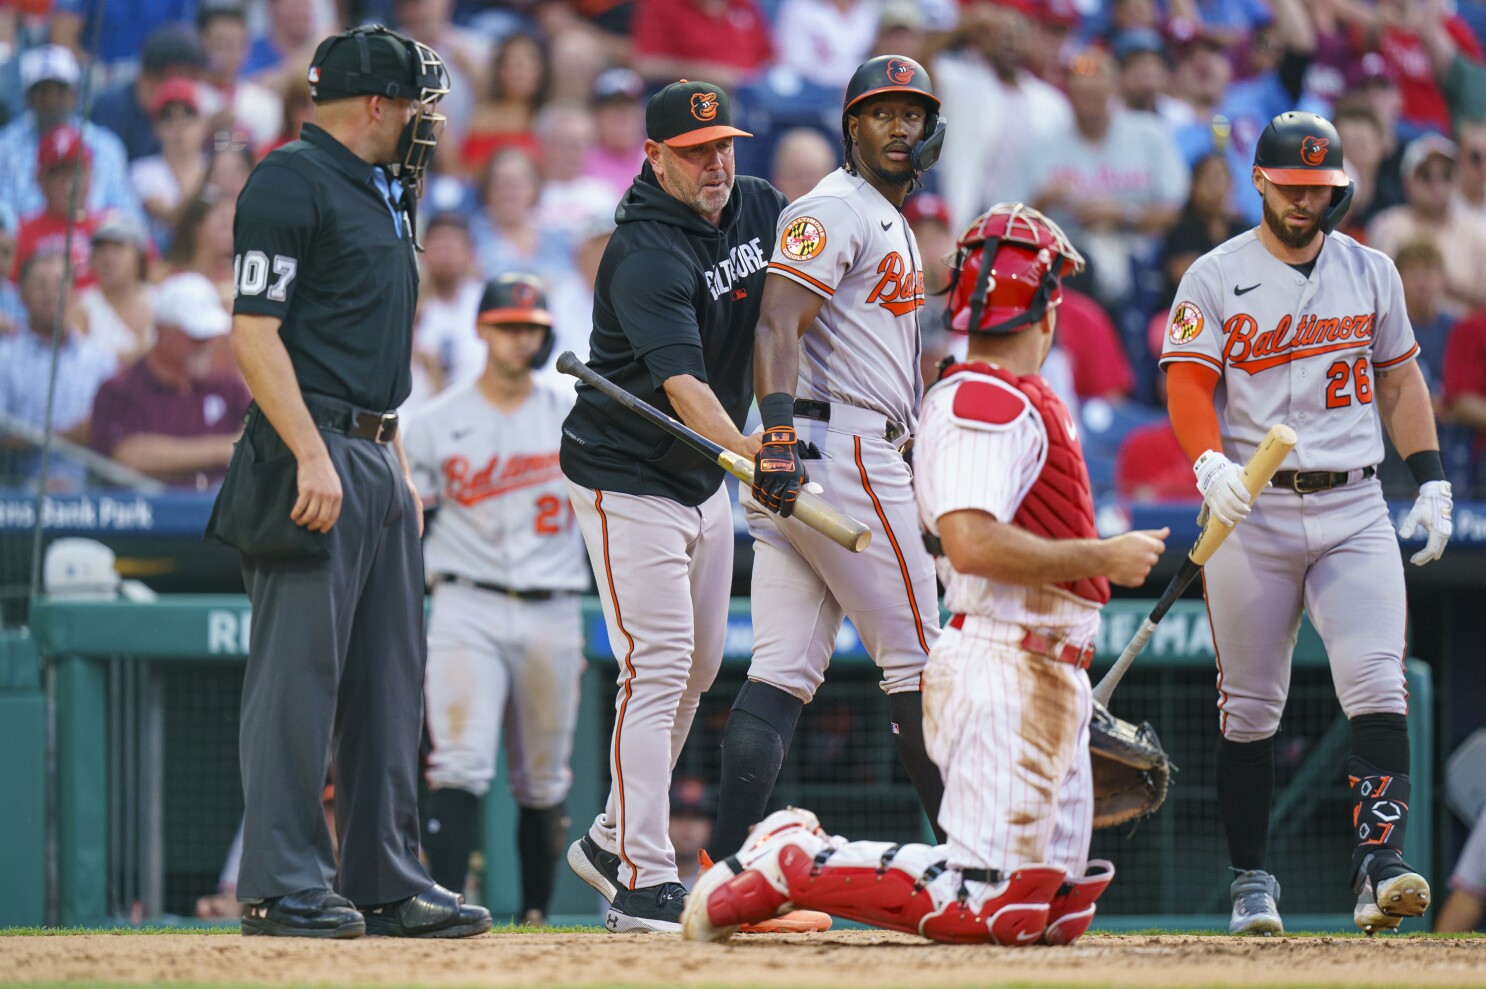 Can the Baltimore Orioles clutch hitting help win them a World Series?